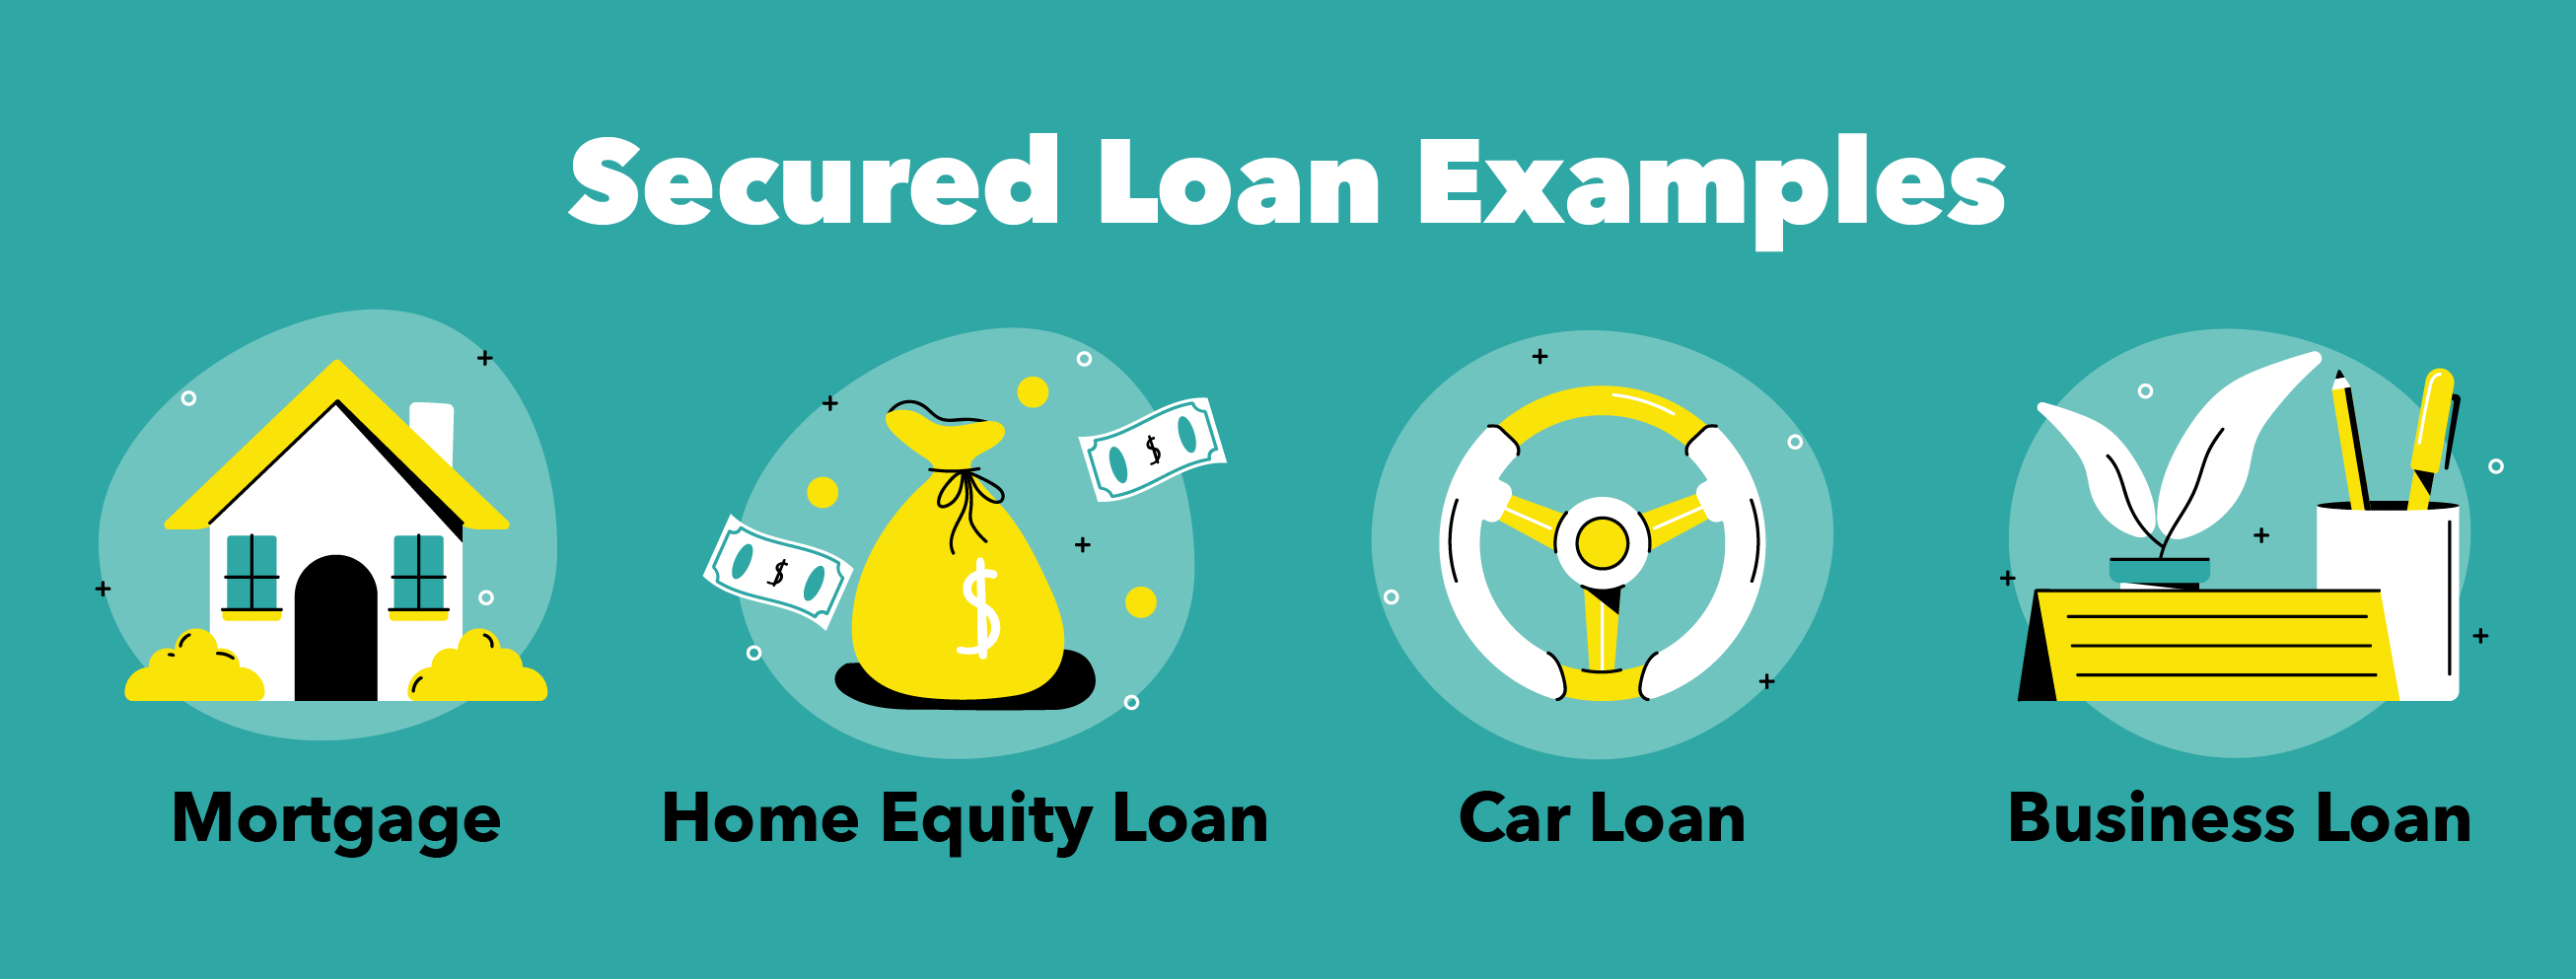 Secured Loan Examples